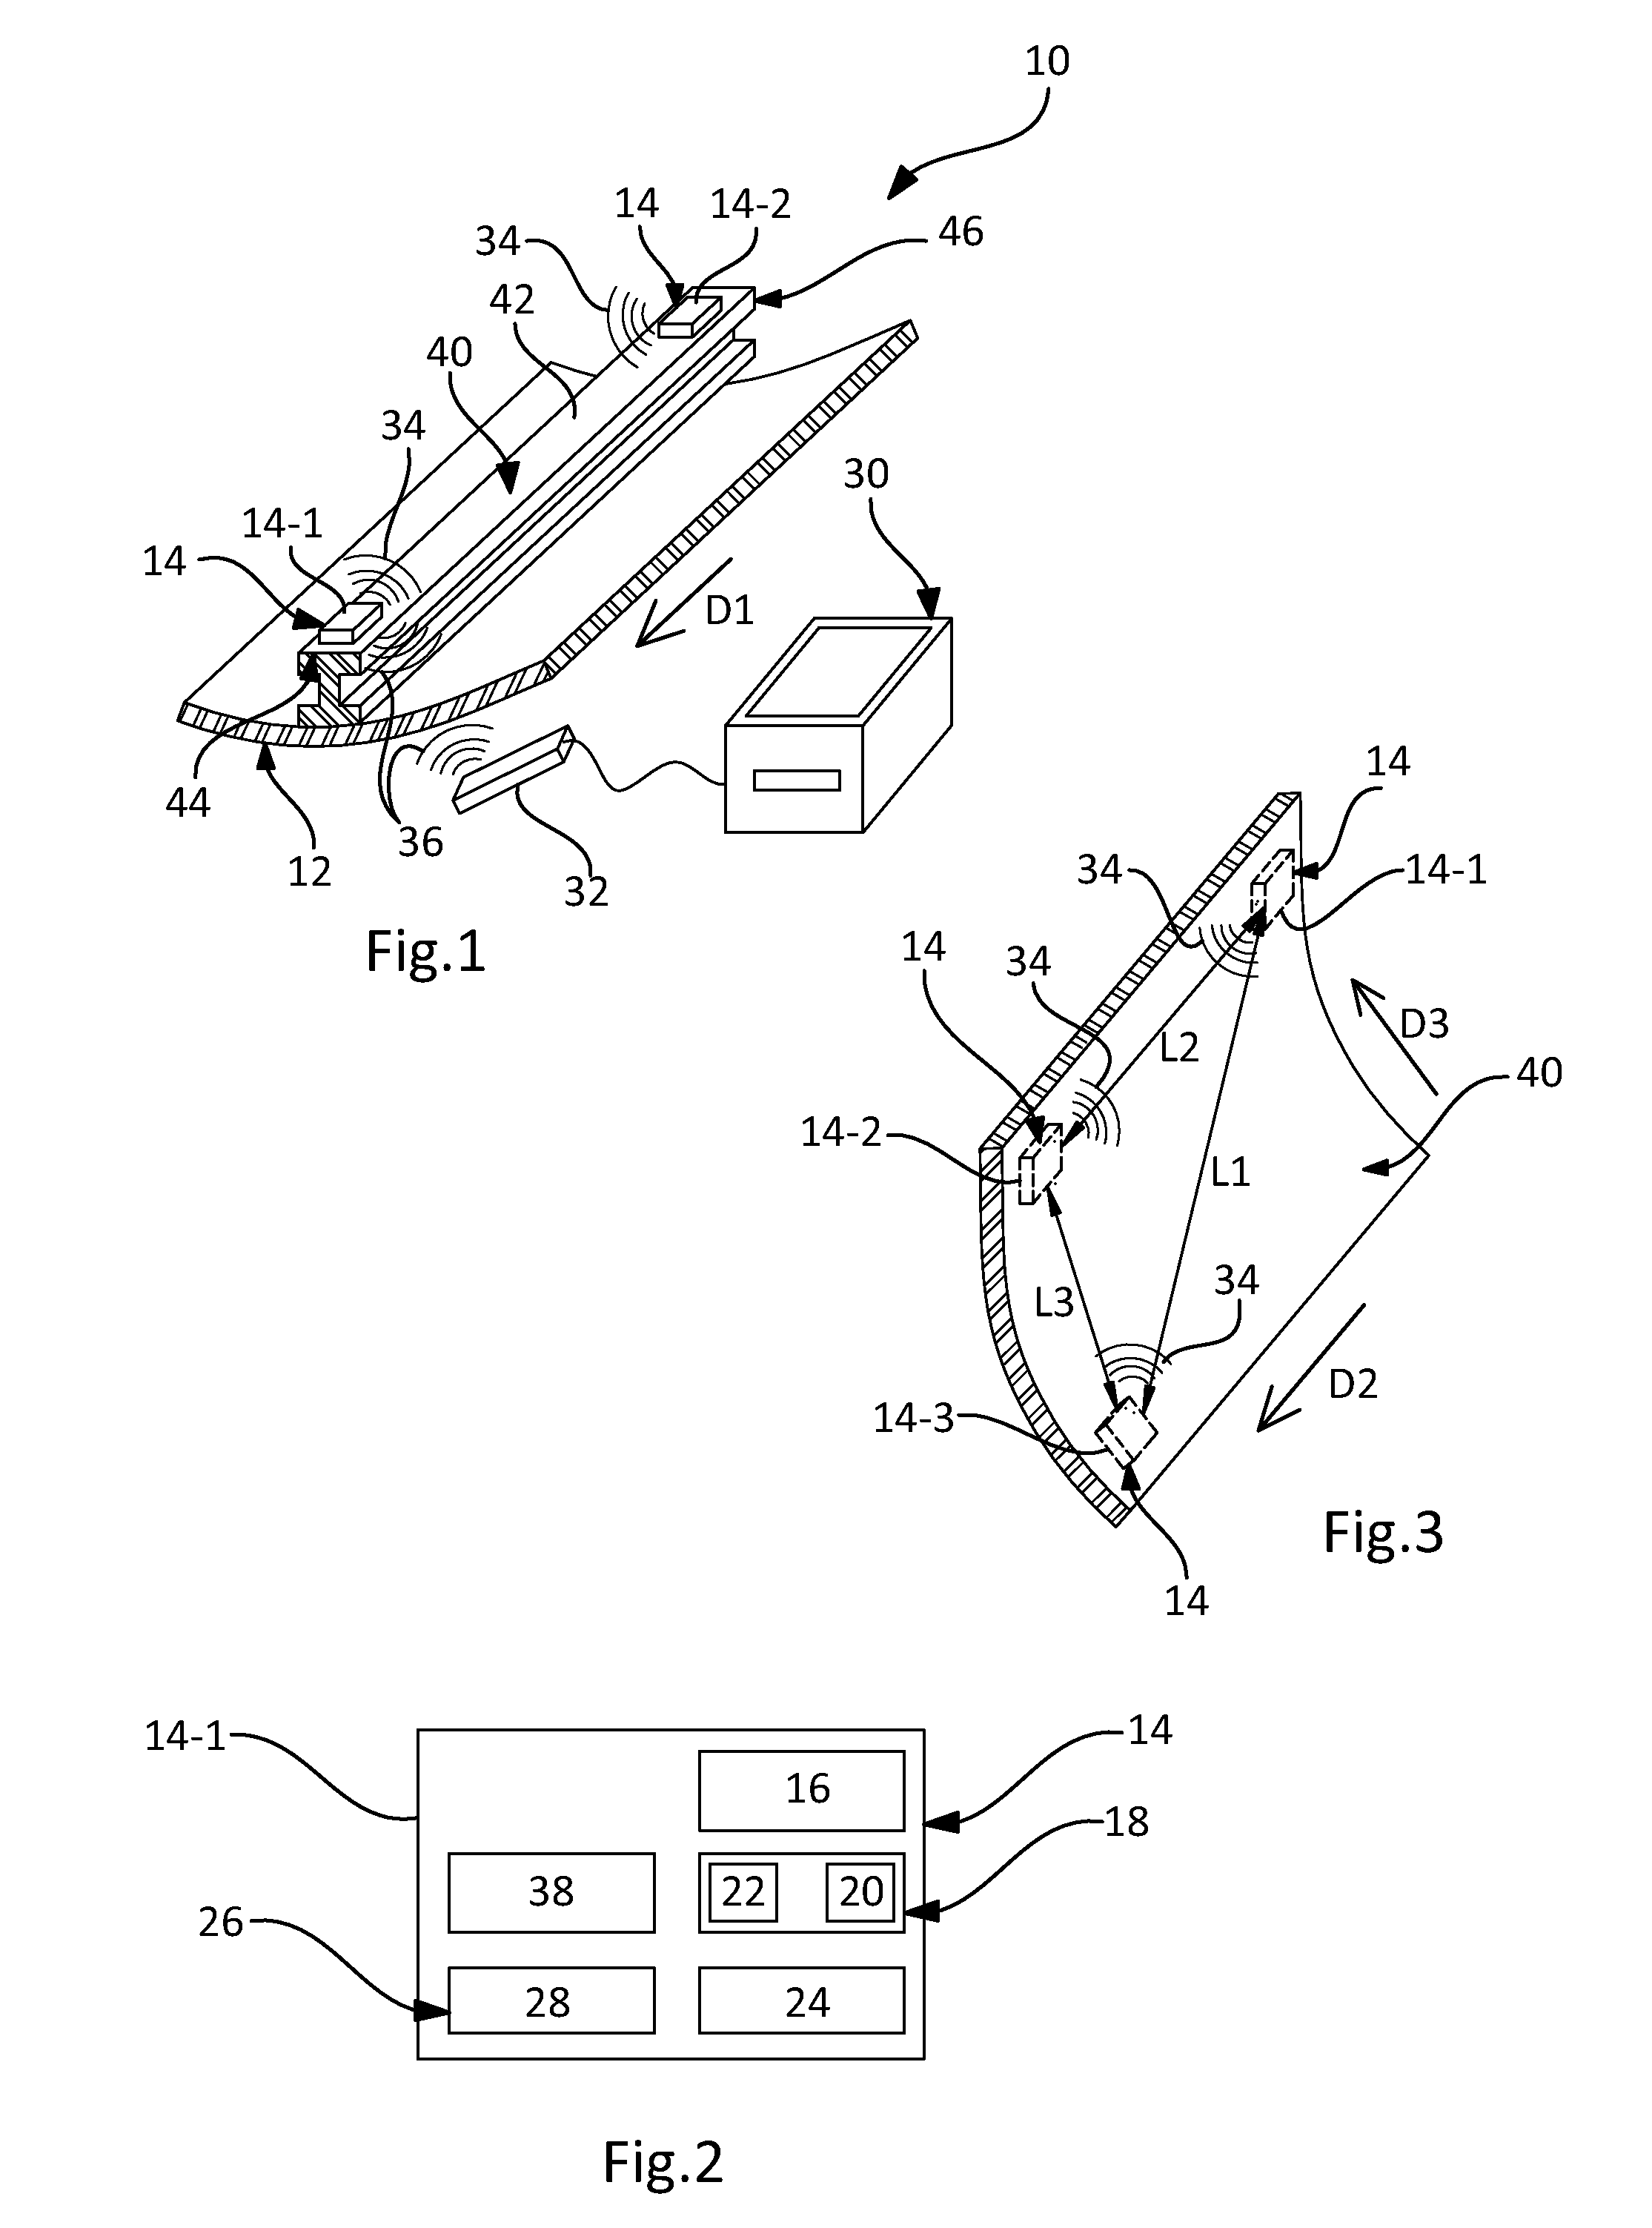 Device and method for detecting an impact on a composite material structure